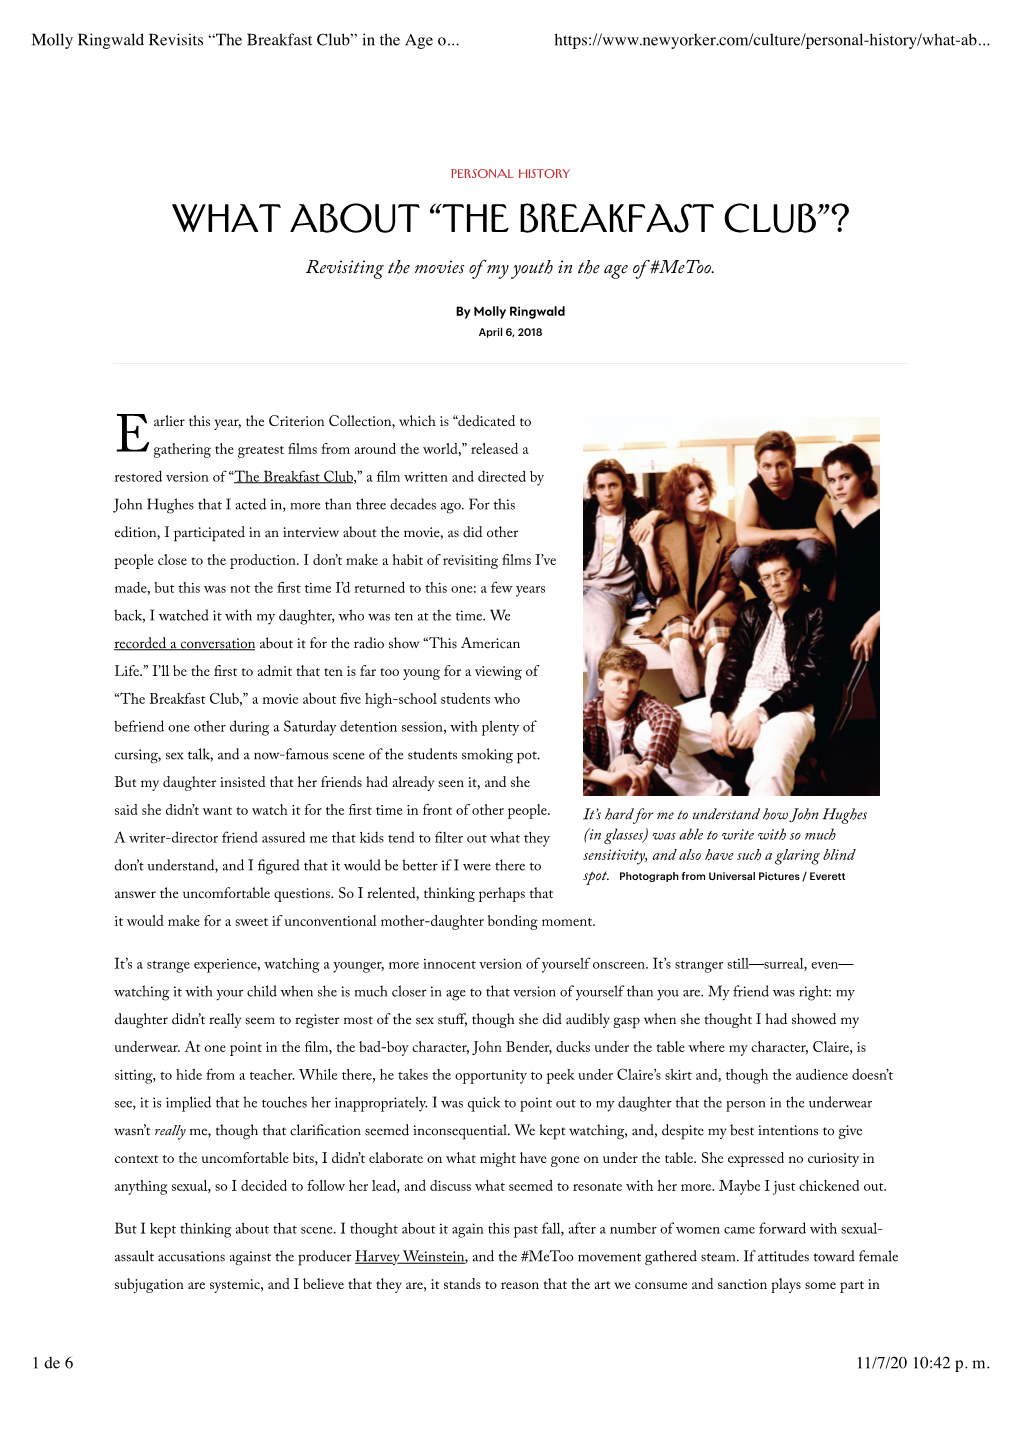 Molly Ringwald Revisits “The Breakfast Club” in the Age O